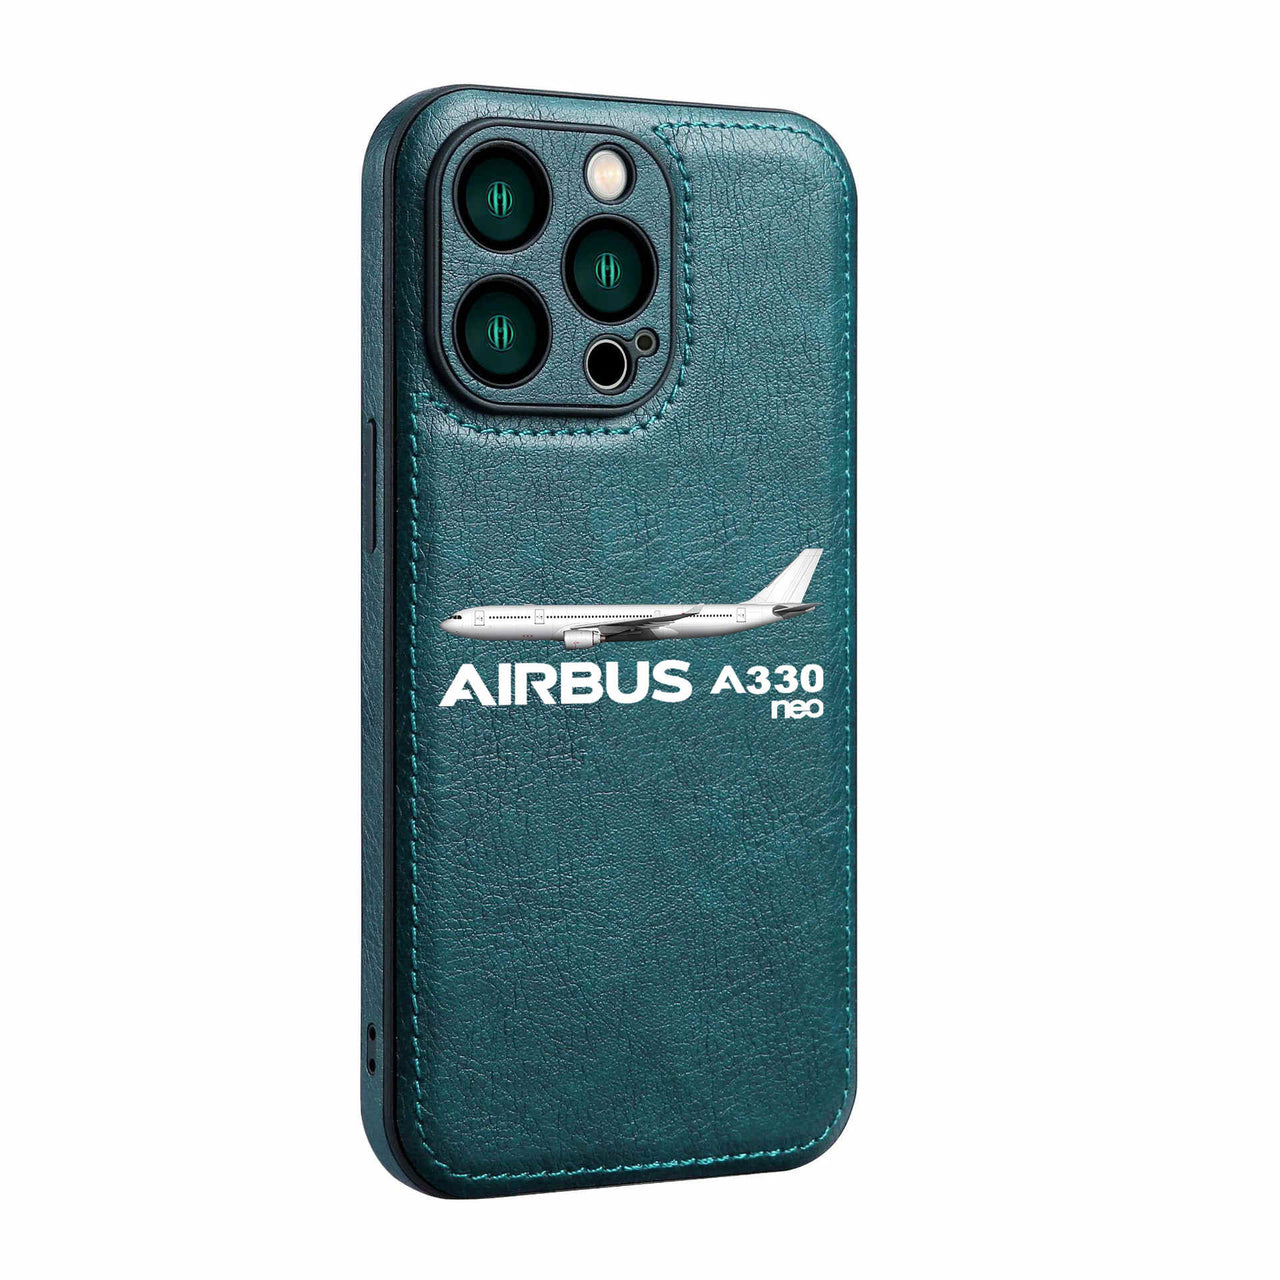 The Airbus A330neo Designed Leather iPhone Cases